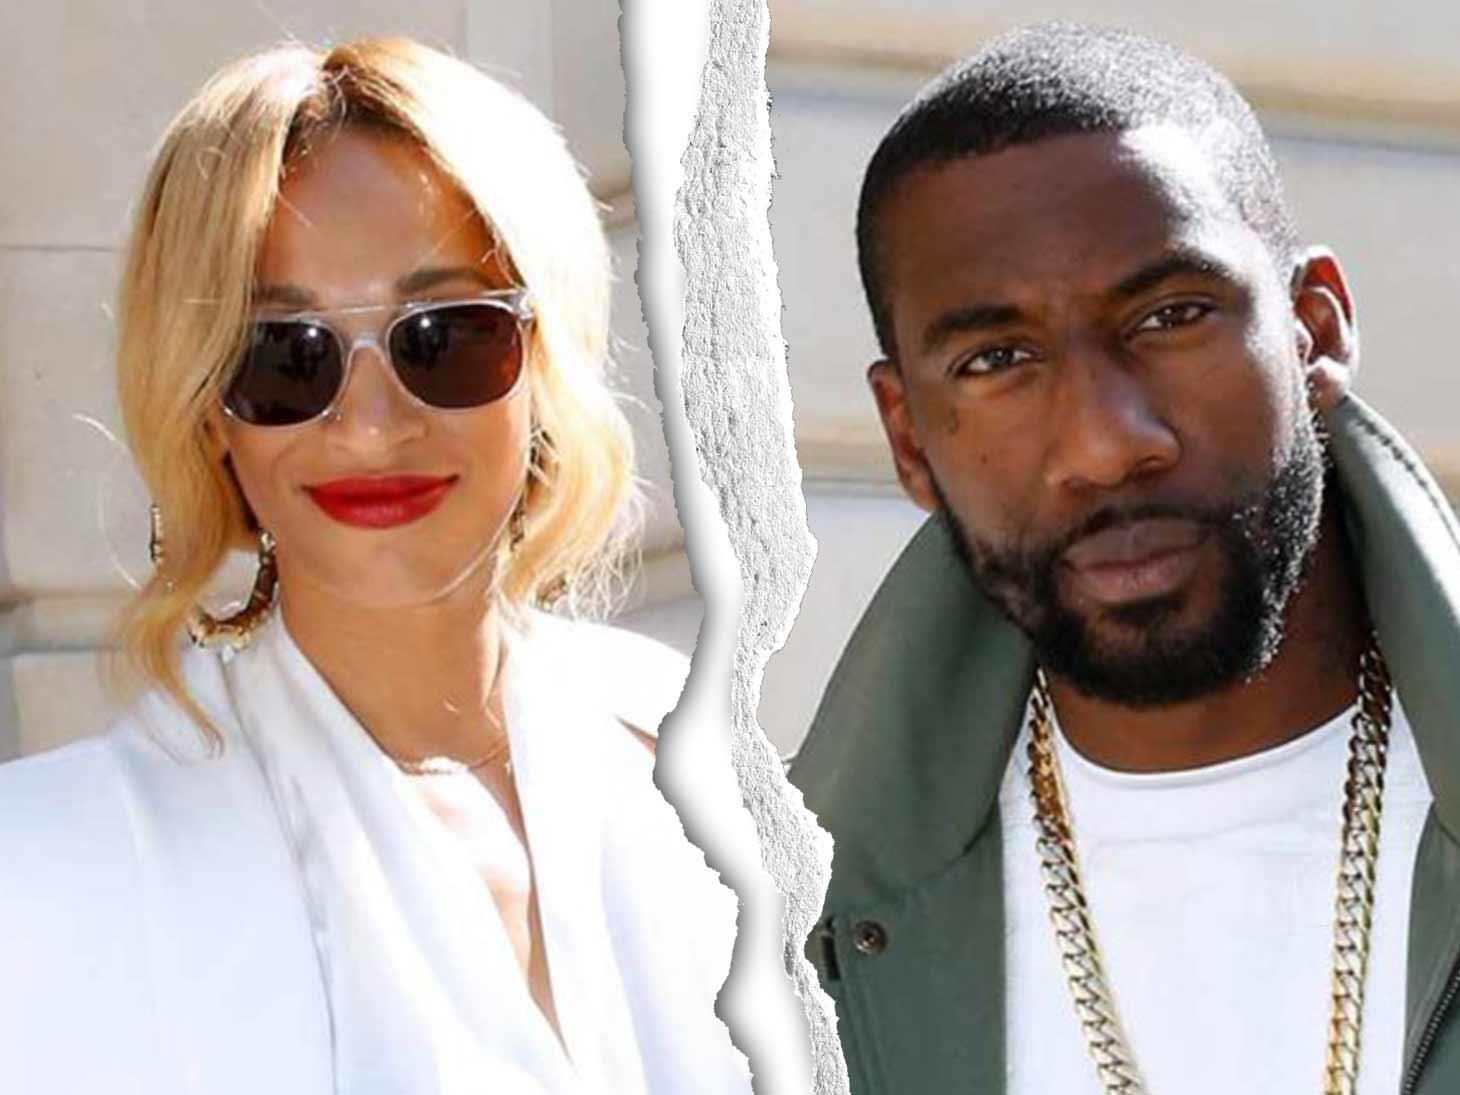 Former NBA Star Amar’e Stoudemire Files for Divorce From Wife After His Love Child Was Exposed in Legal Battle